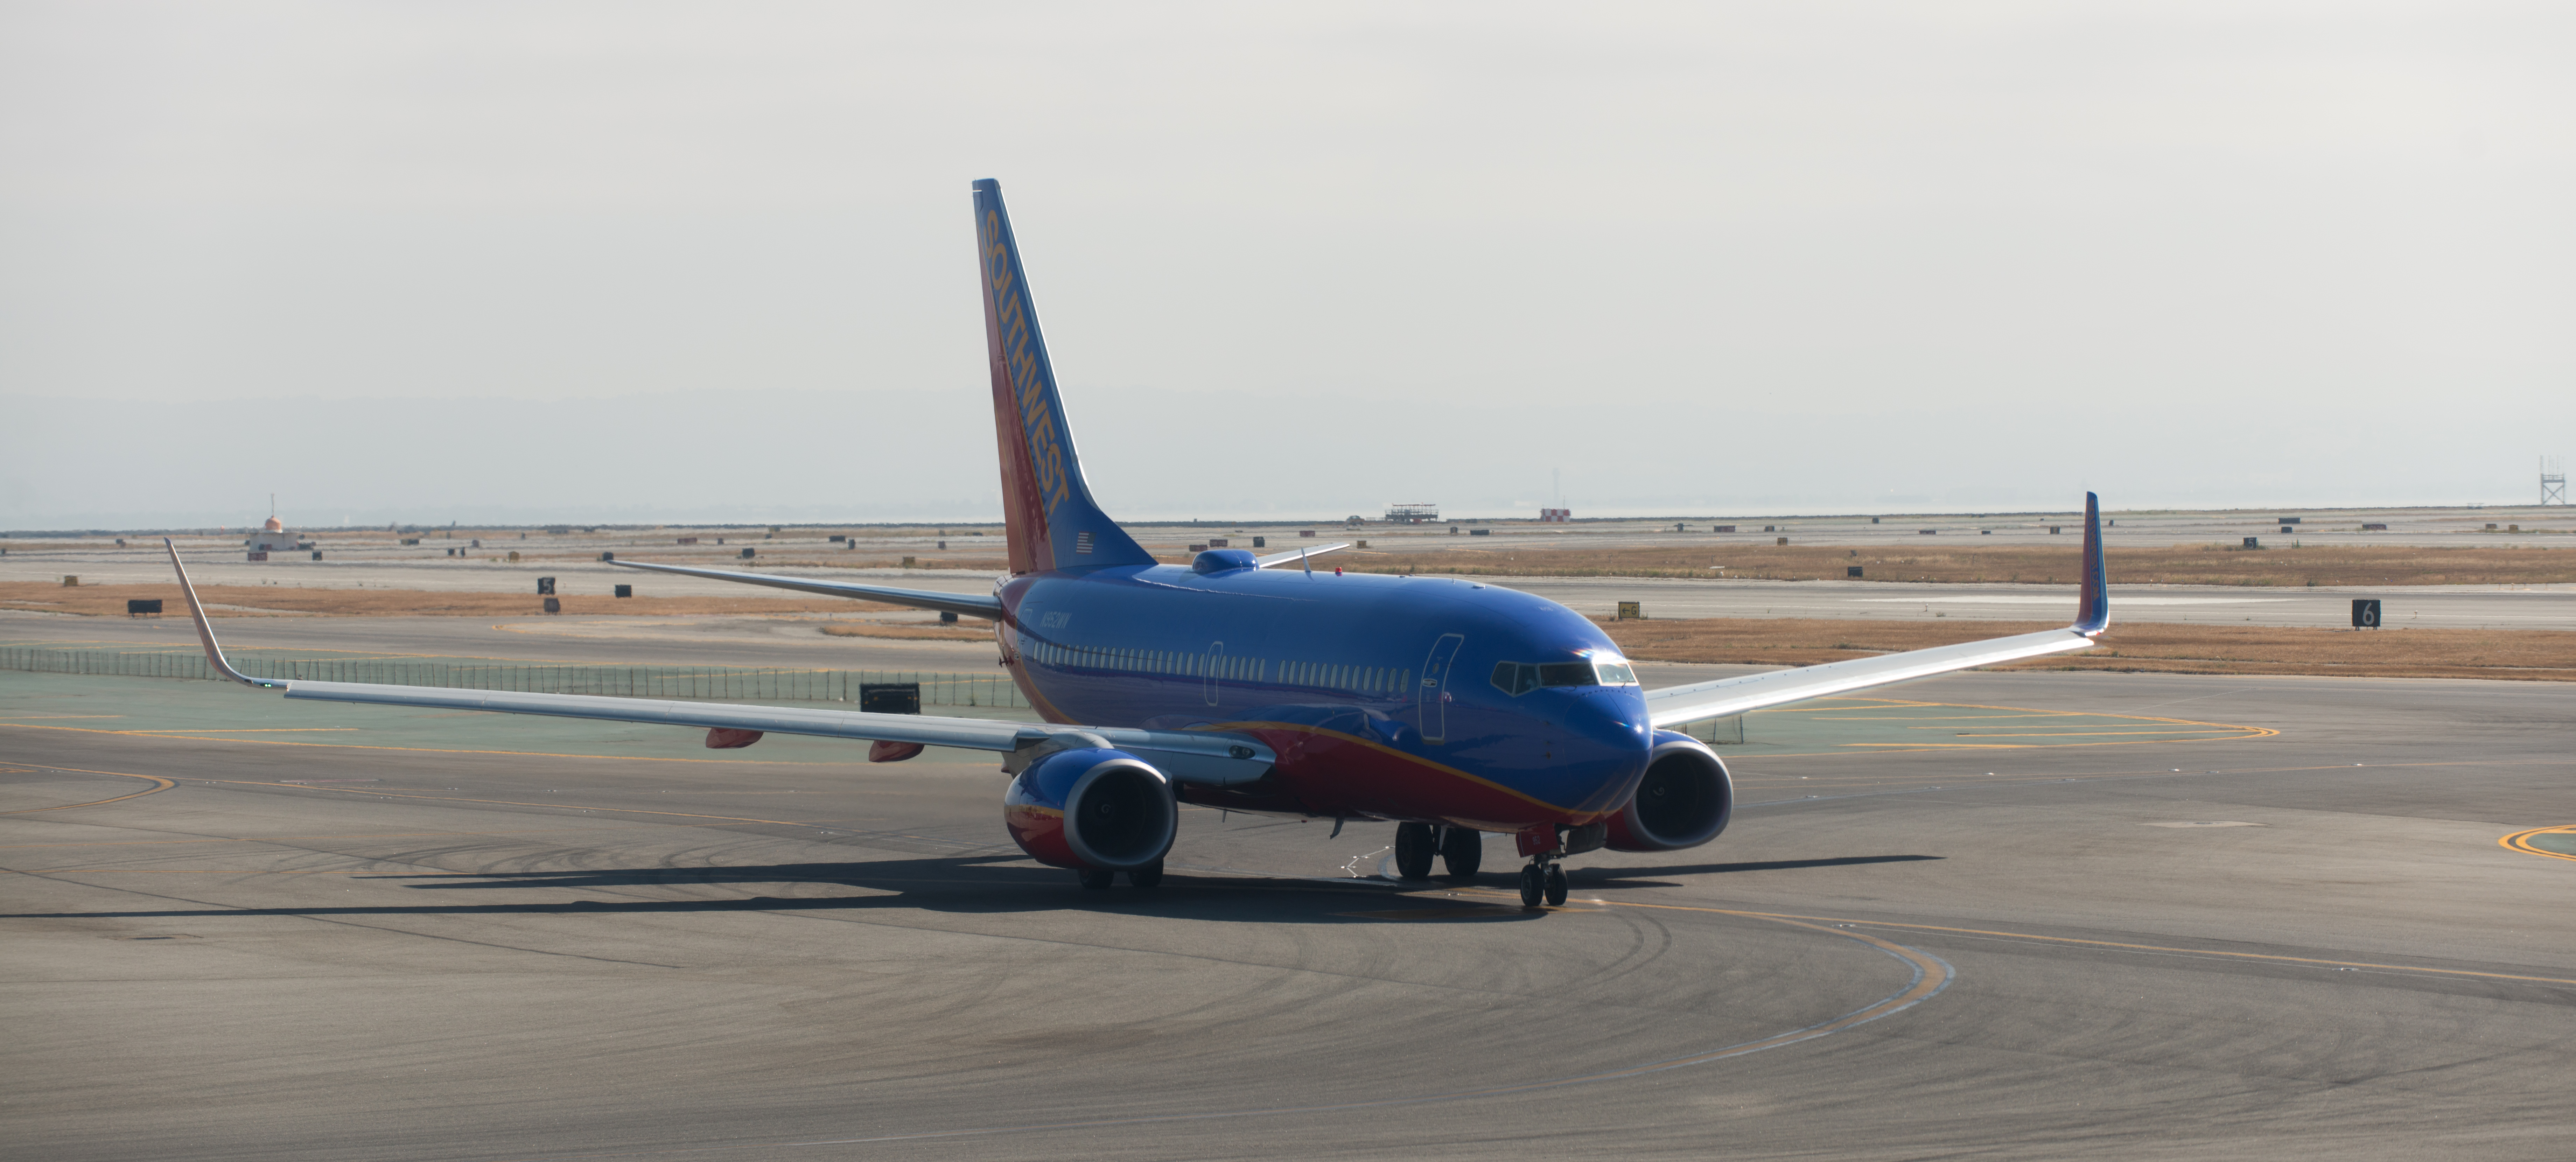 Southwest airlines plane waiting for takeoff photo